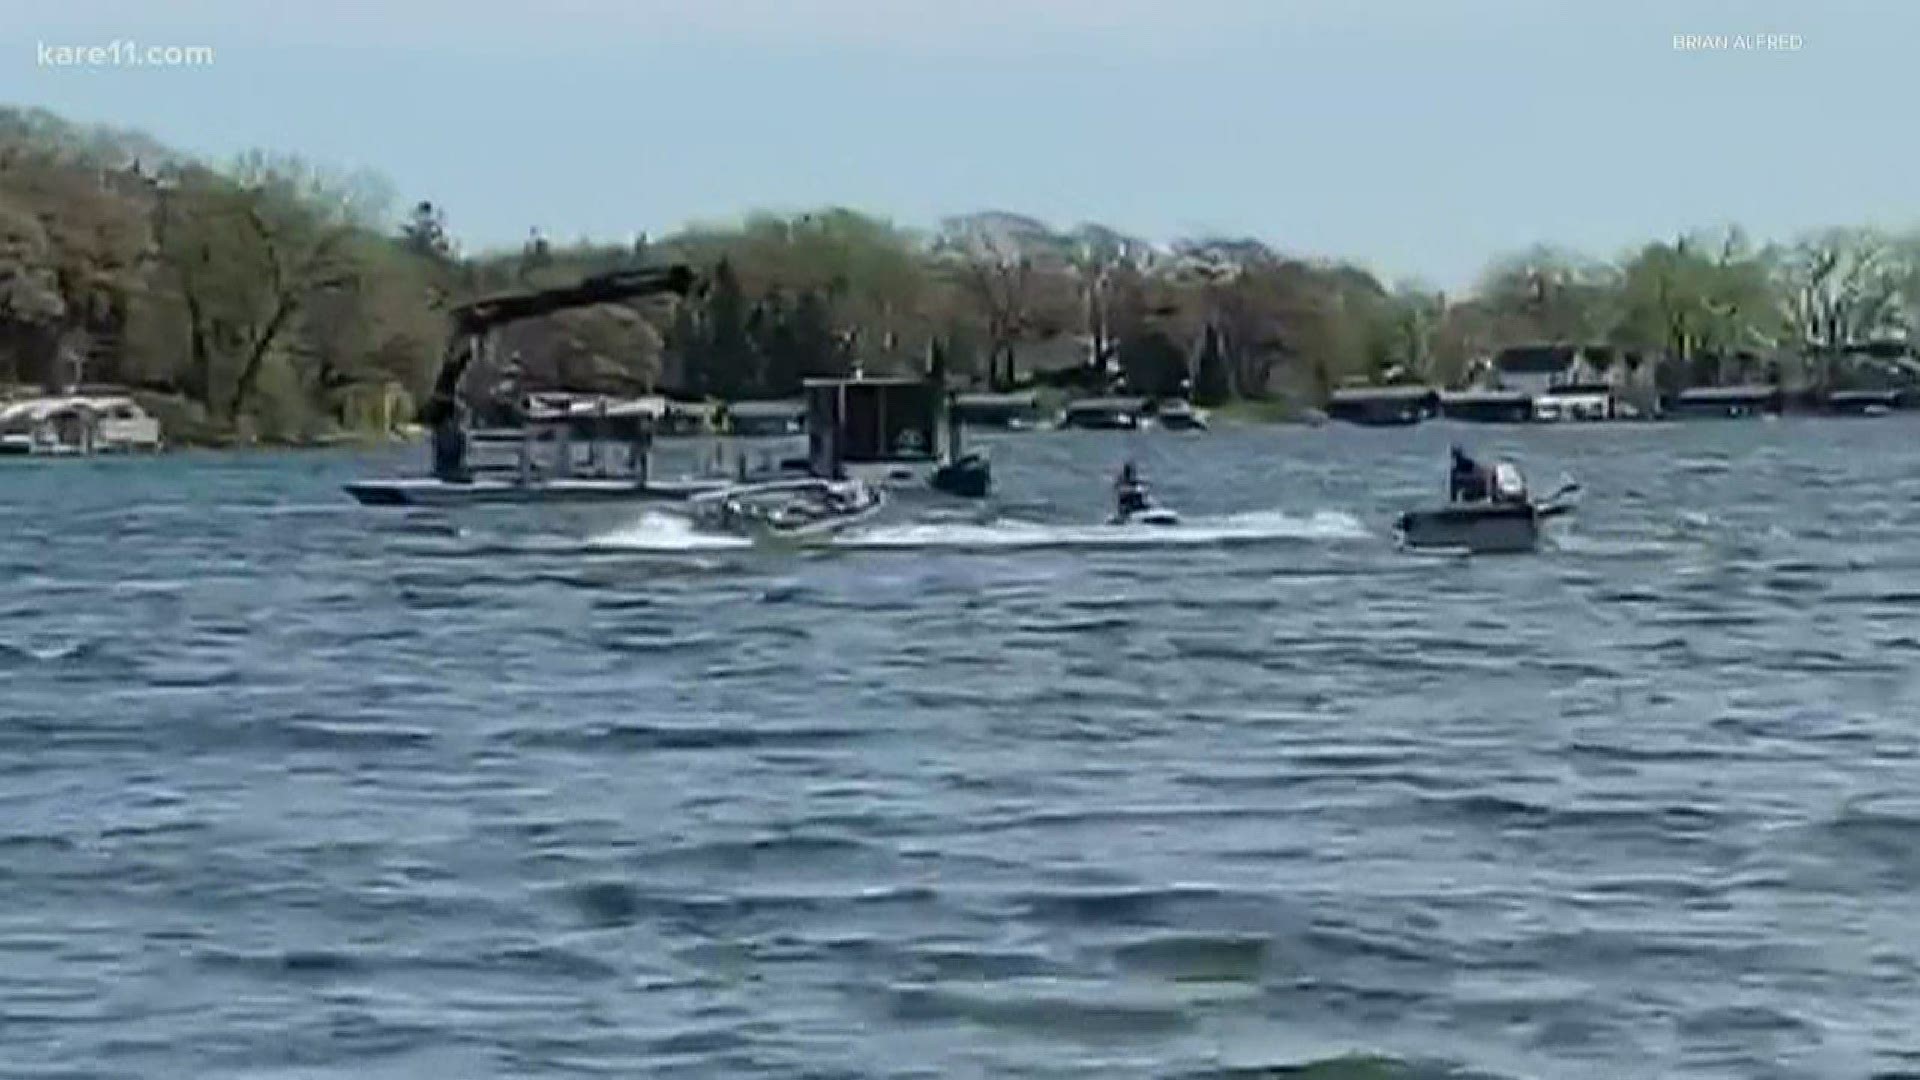 The Hennepin County Sheriff's Office says two men on a fishing boat encountered rough water and were tossed overboard Monday.